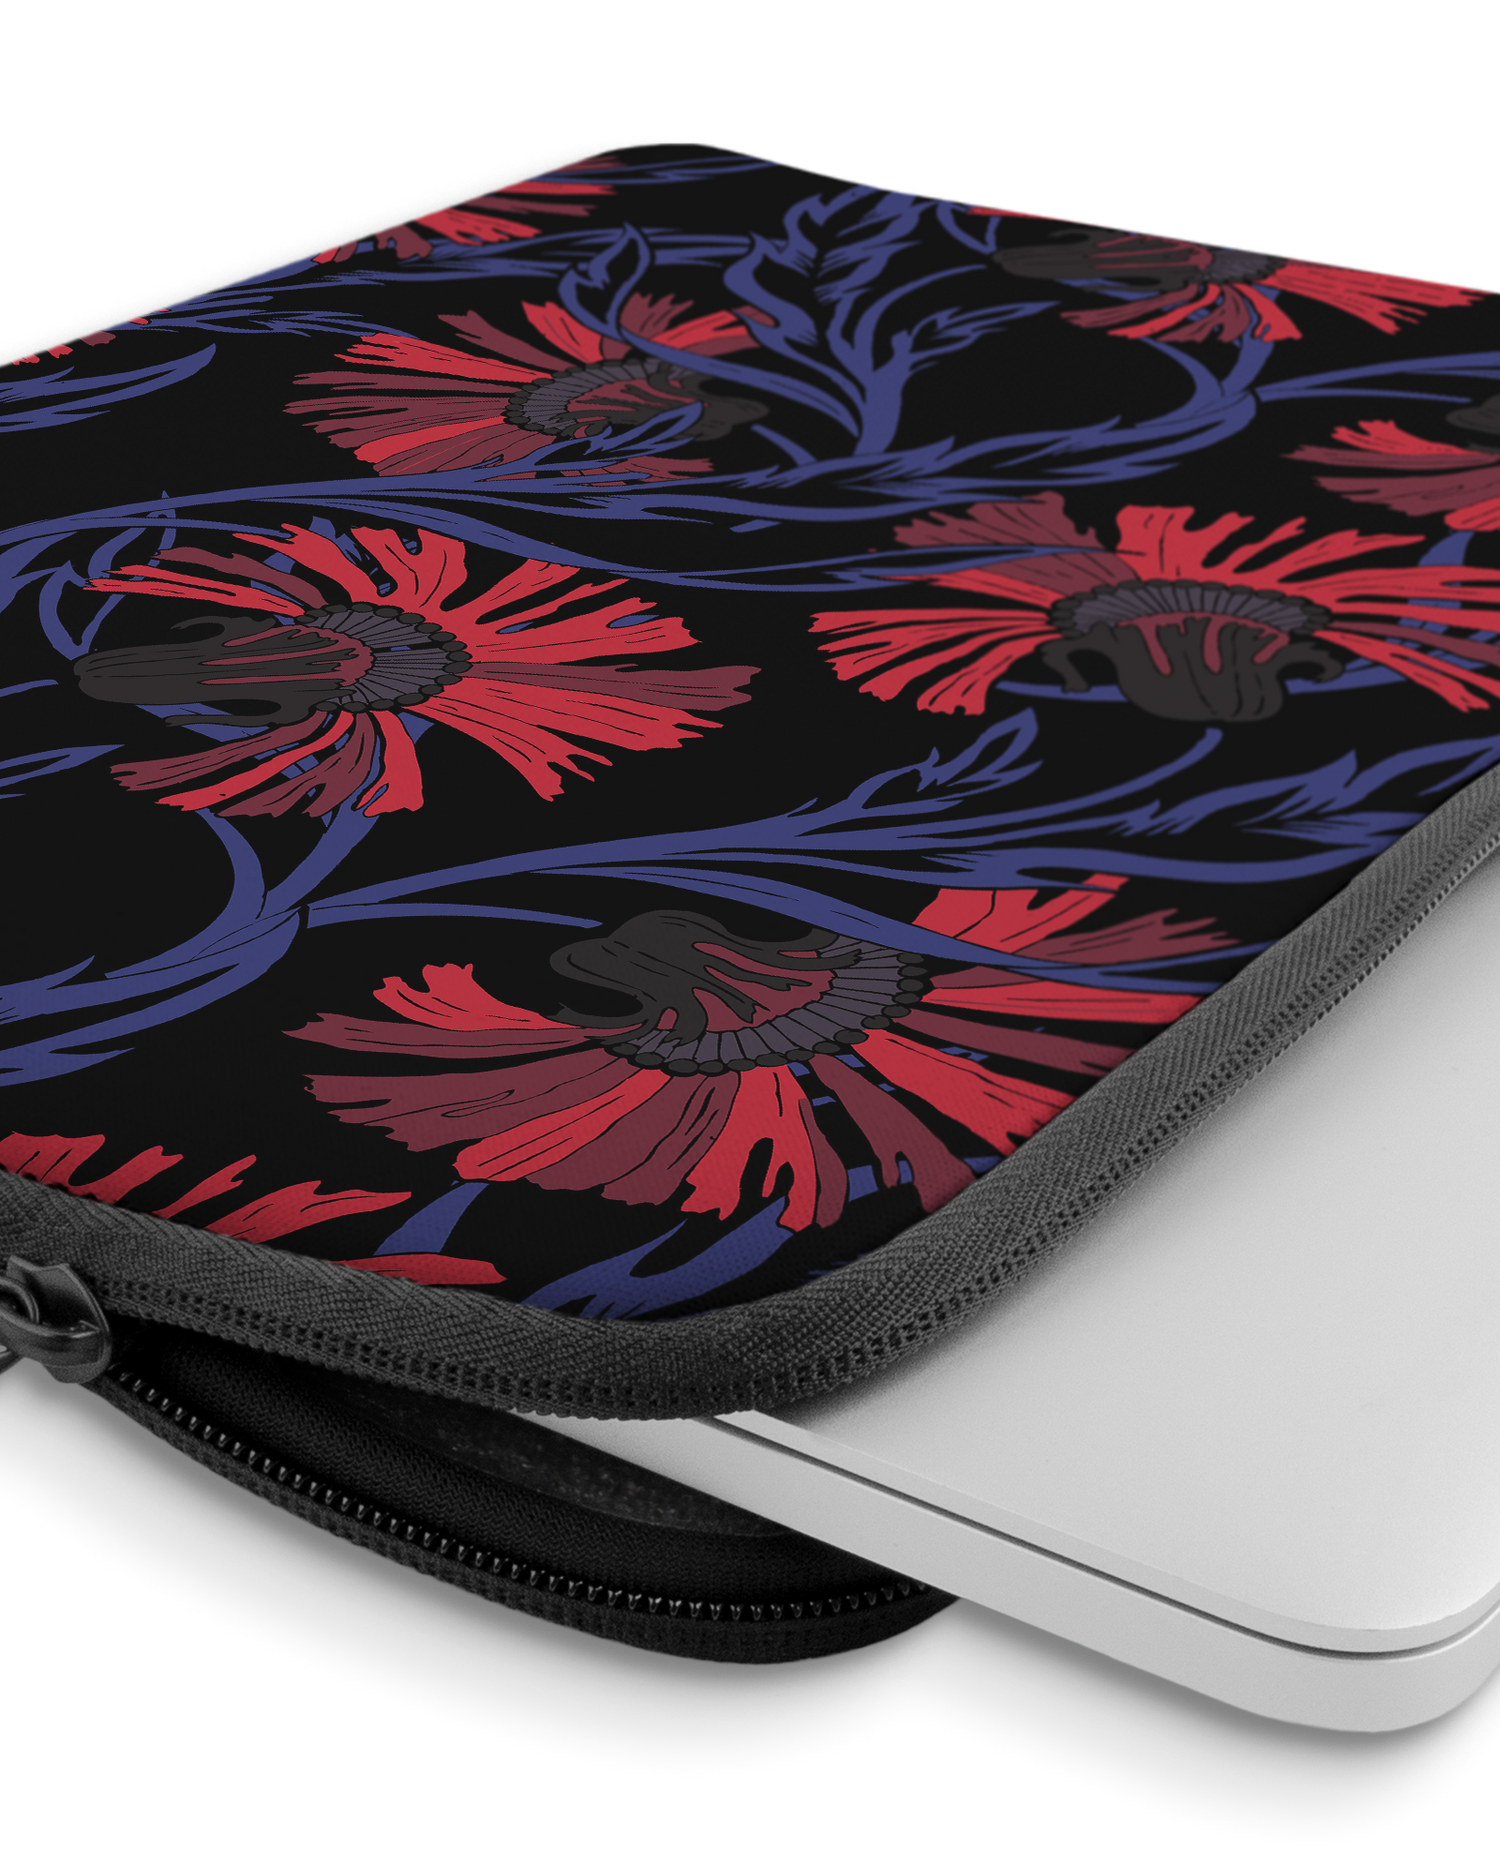 Midnight Floral Laptop Case 13-14 inch with device inside